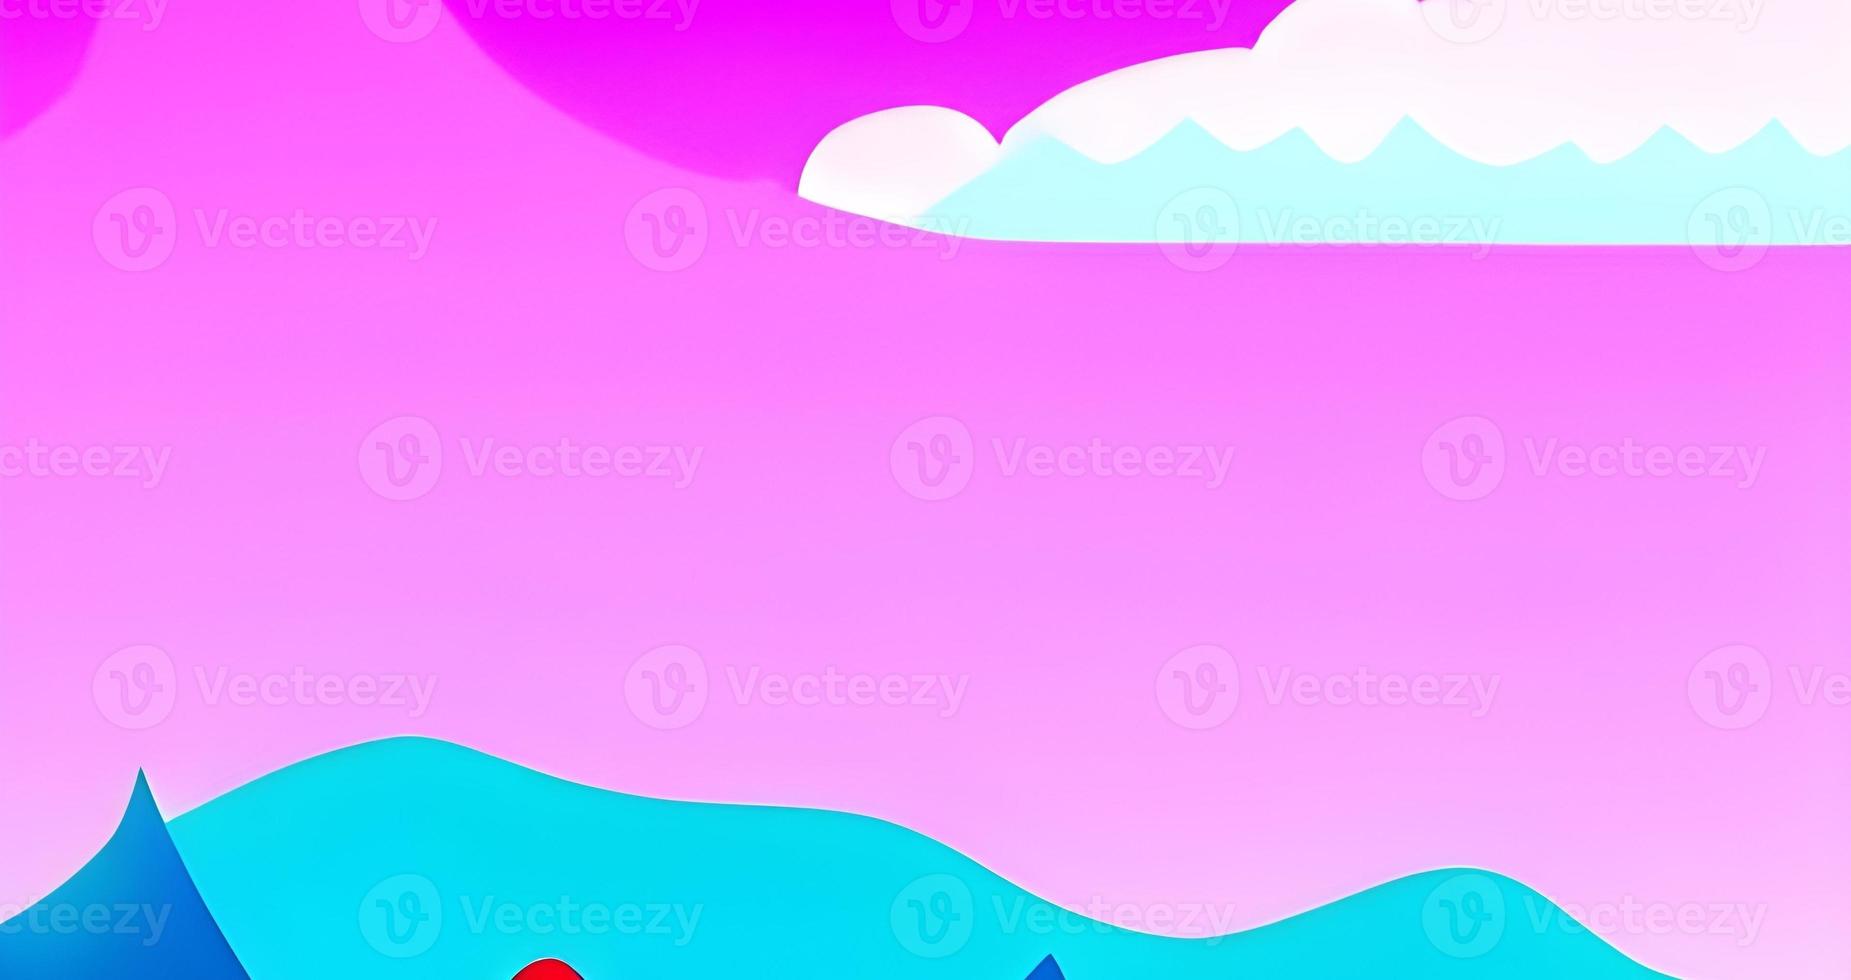 alien planet, neon space background with falling meteor in dark starry sky, fantasy extraterrestrial landscape with craters full of glowing liquid, Cartoon photo